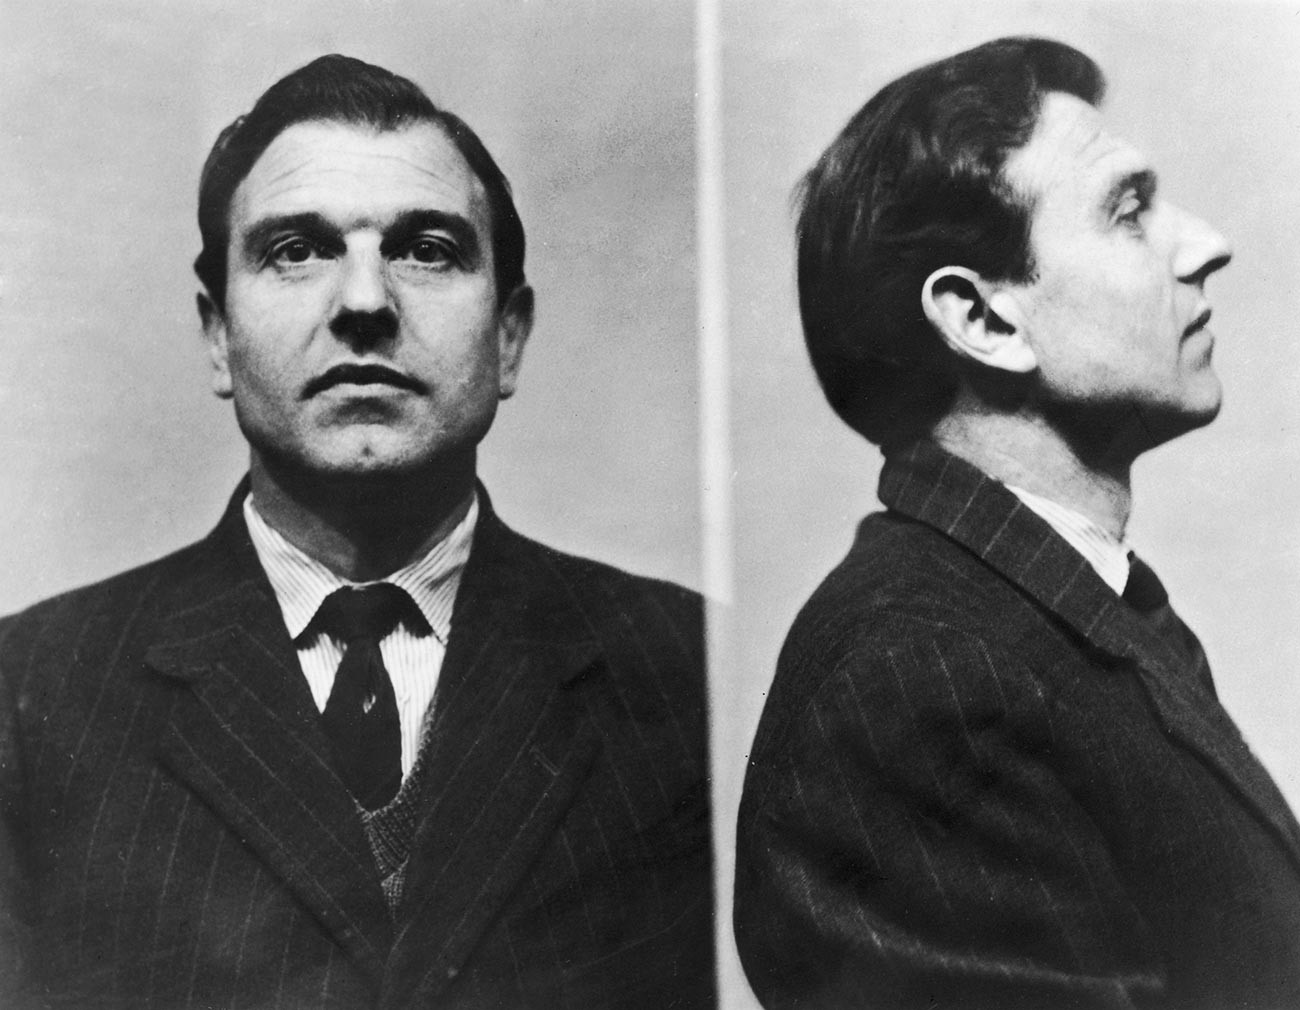 Prison pictures of George Blake, 1961. 